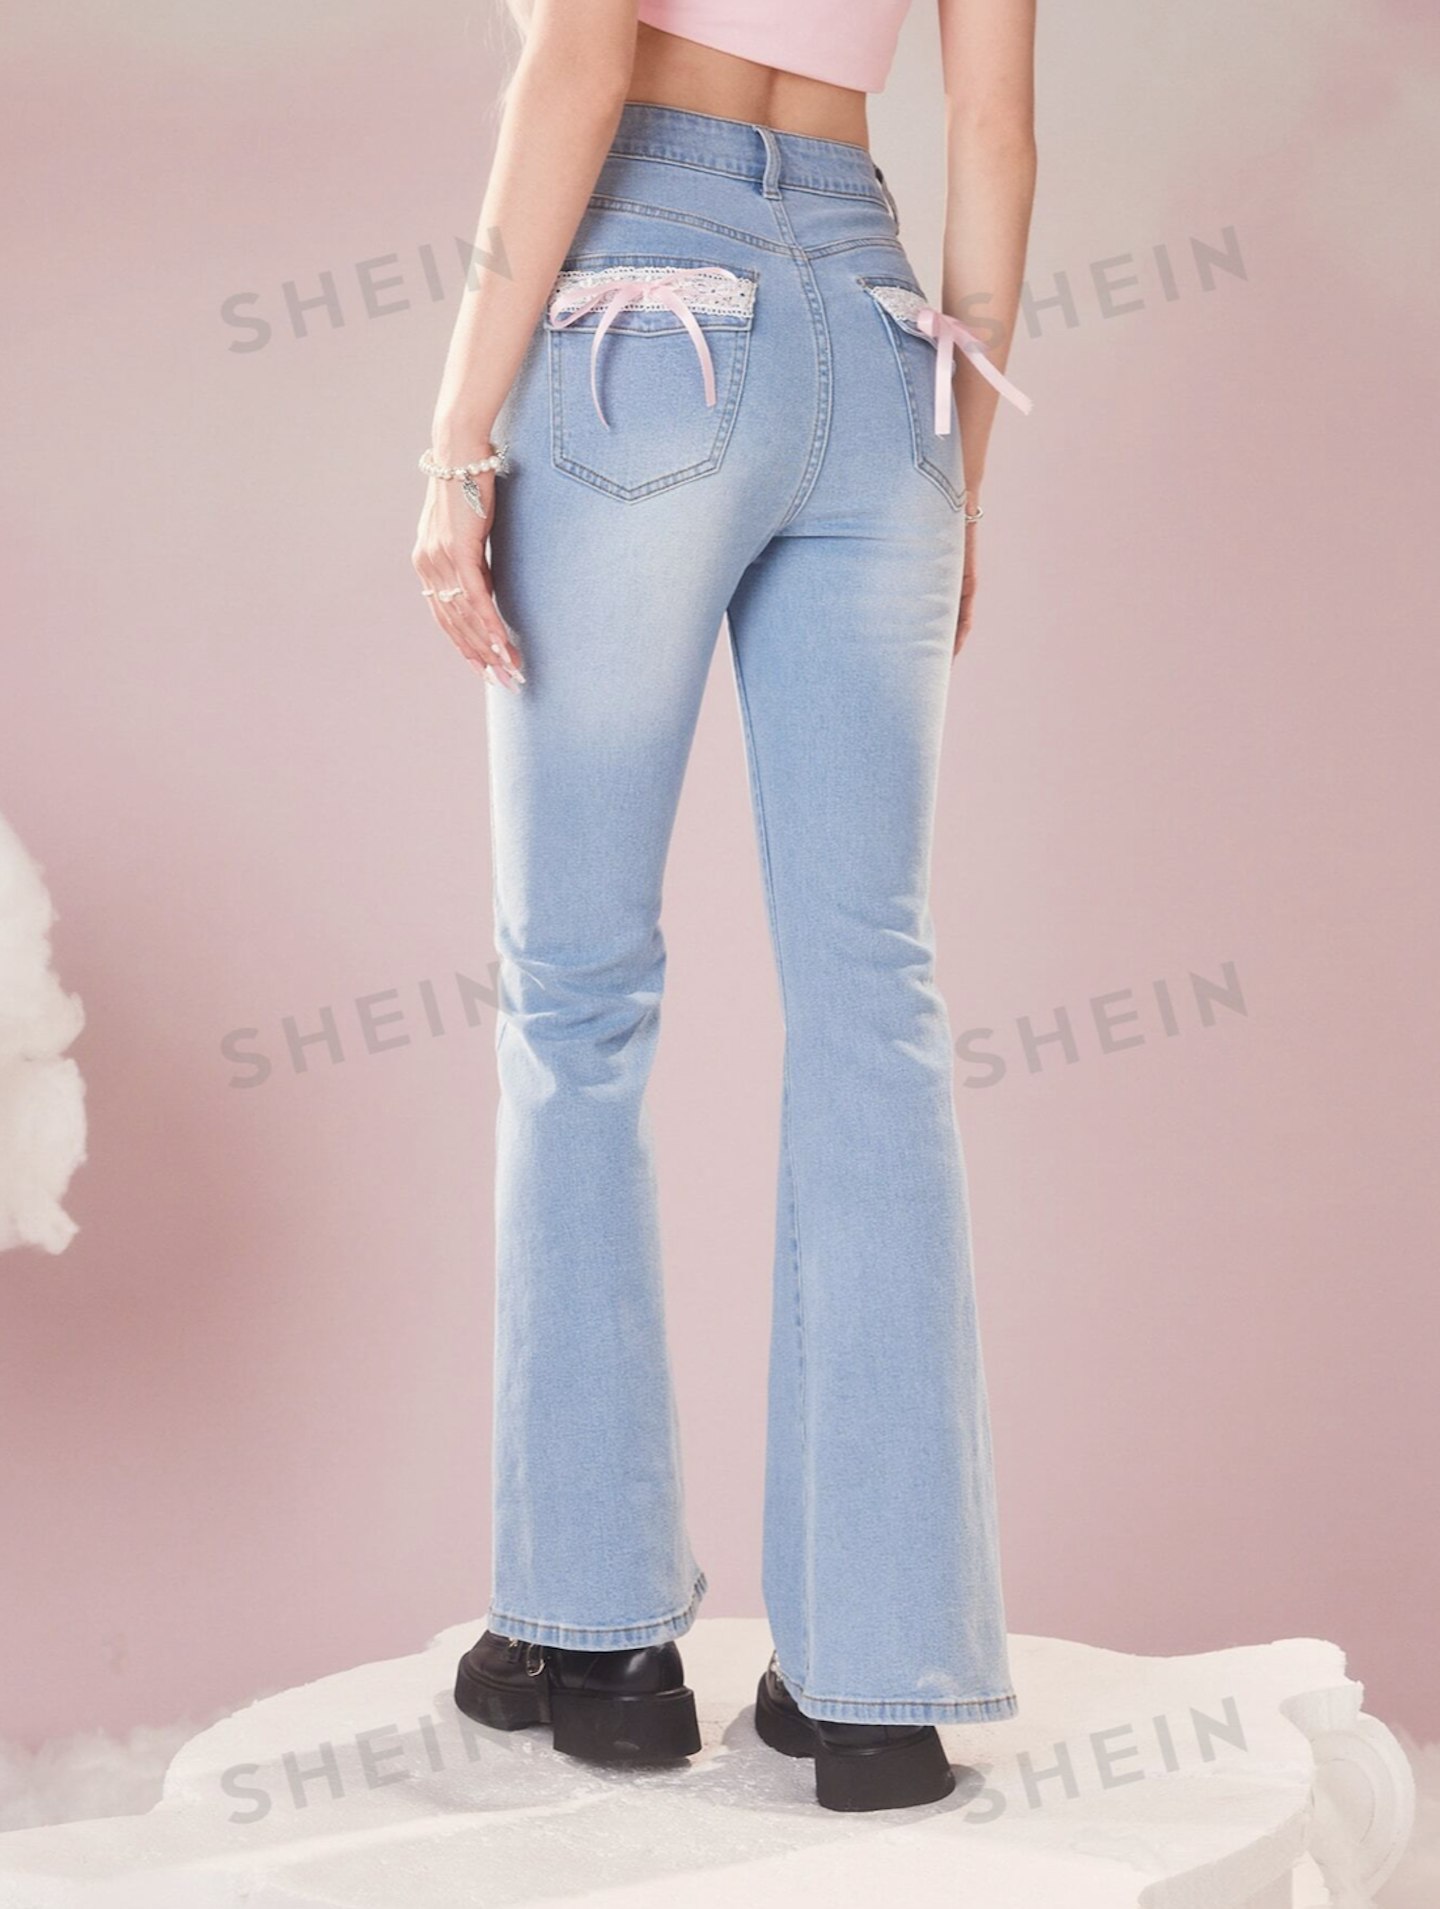 Shein bow jeans